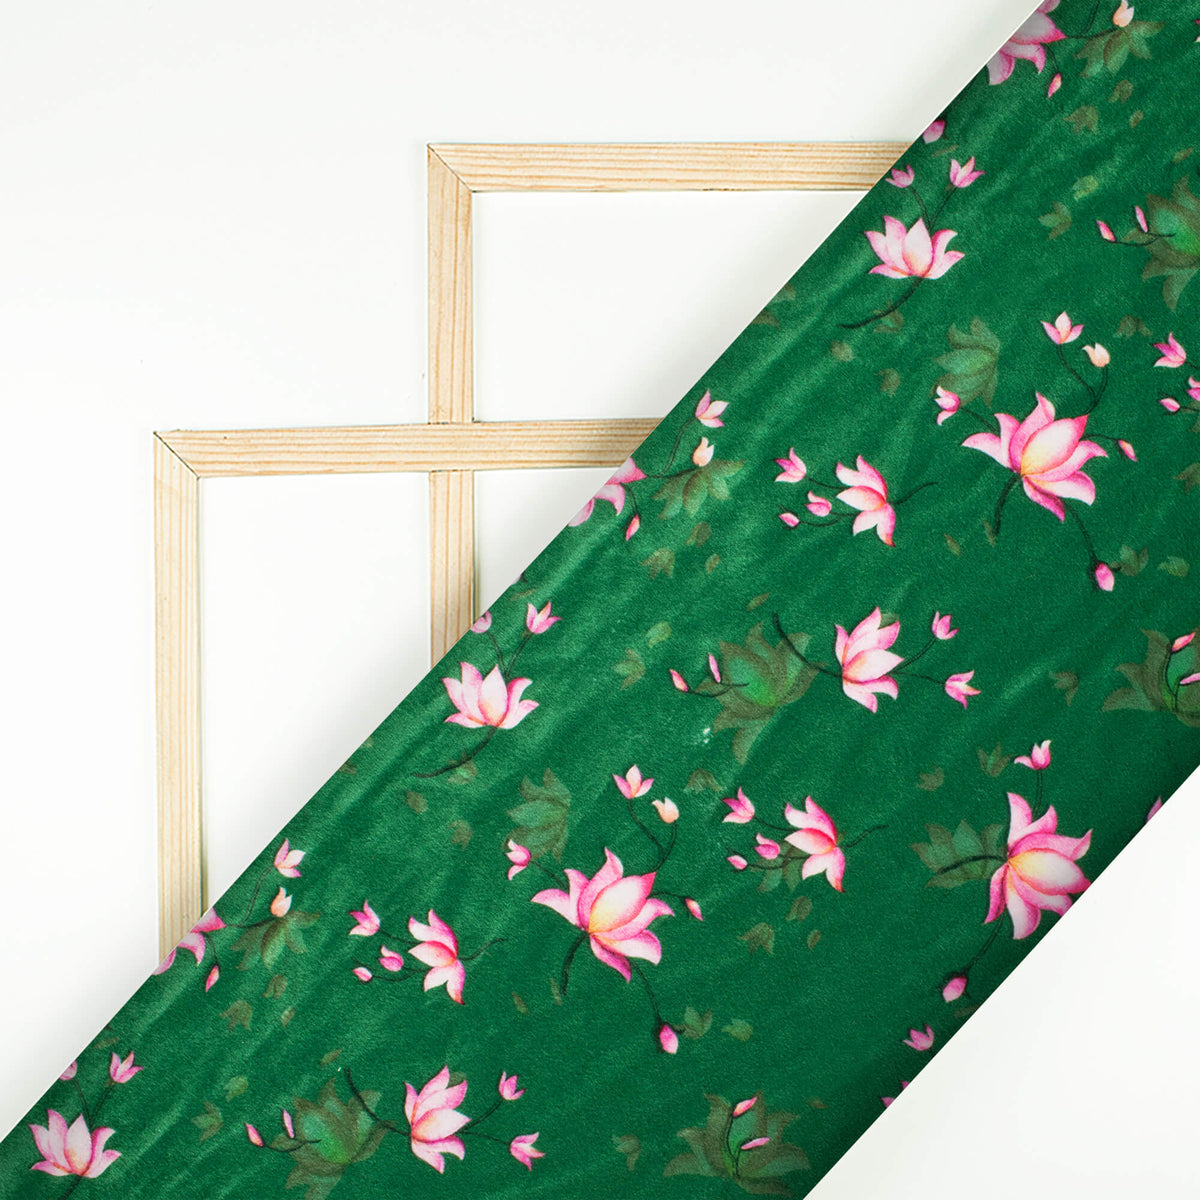 Forest Green And Rose Pink Floral Pattern Digital Print Velvet Fabric (Width 54 Inches)